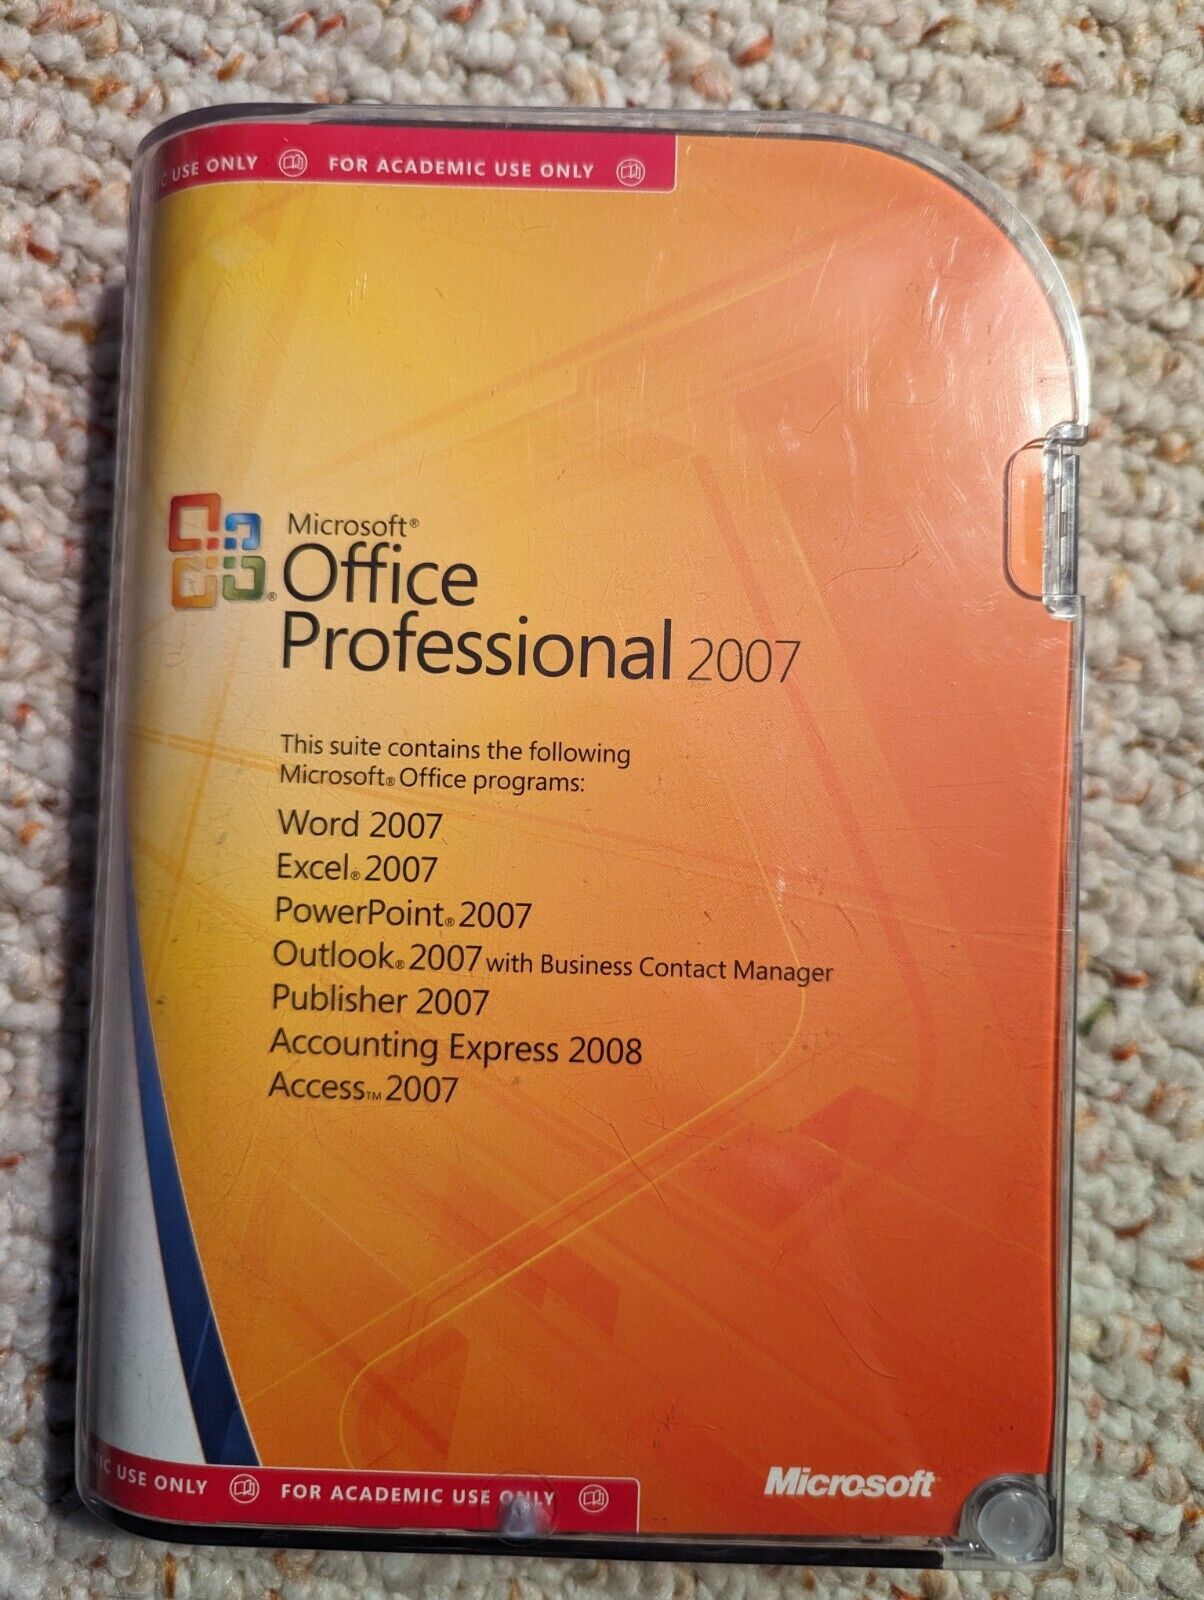 Microsoft Office Professional 2007 For Academic Use Only w/ Key GENUINE